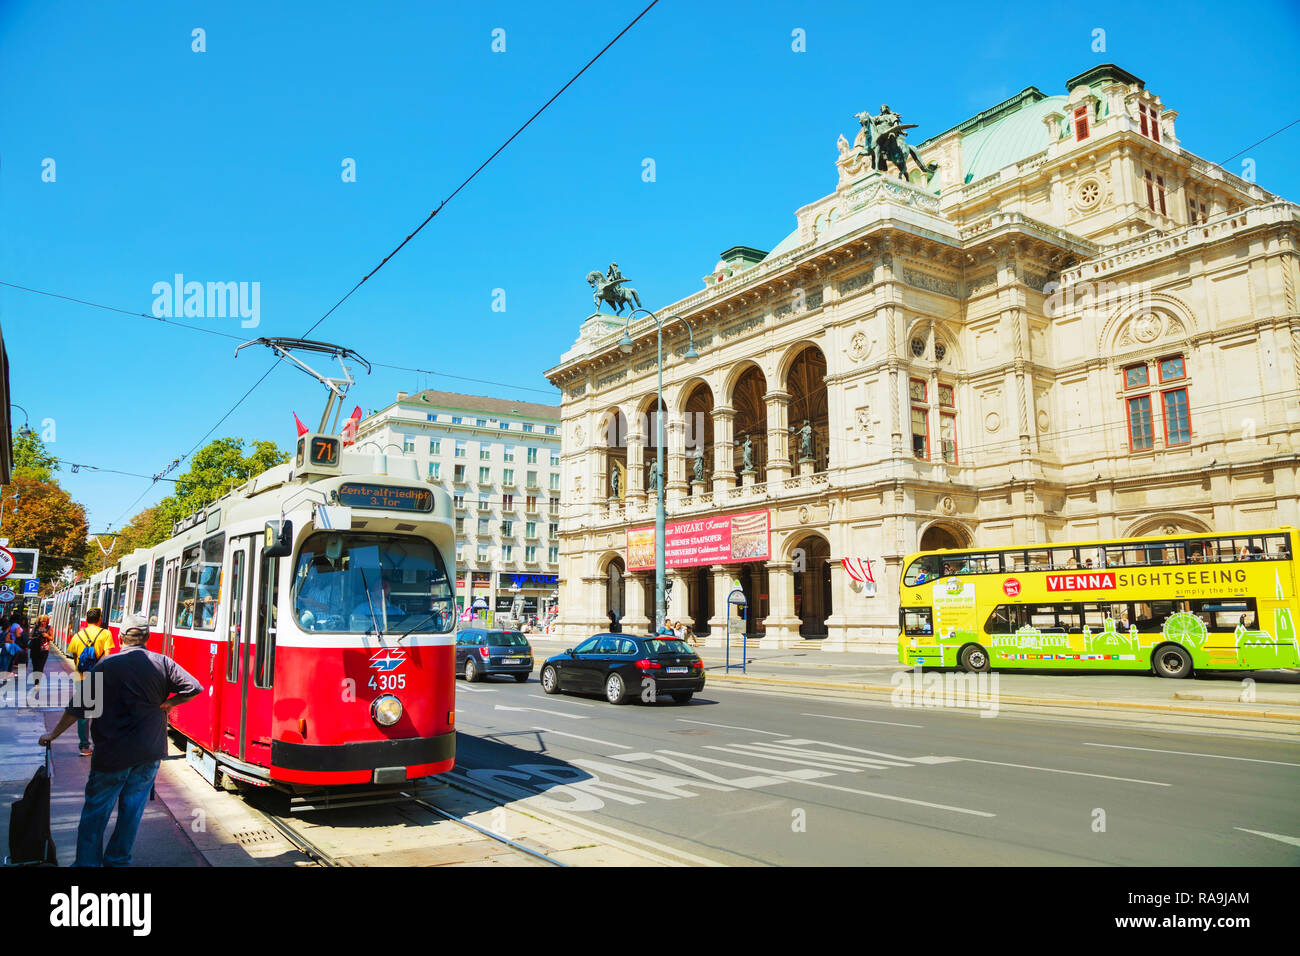 VIENNA - AUGUST 30: Old fashioned tram on August 30, 2017 in Vienna, Austria. Vienna has an extensive train and bus network. Stock Photo